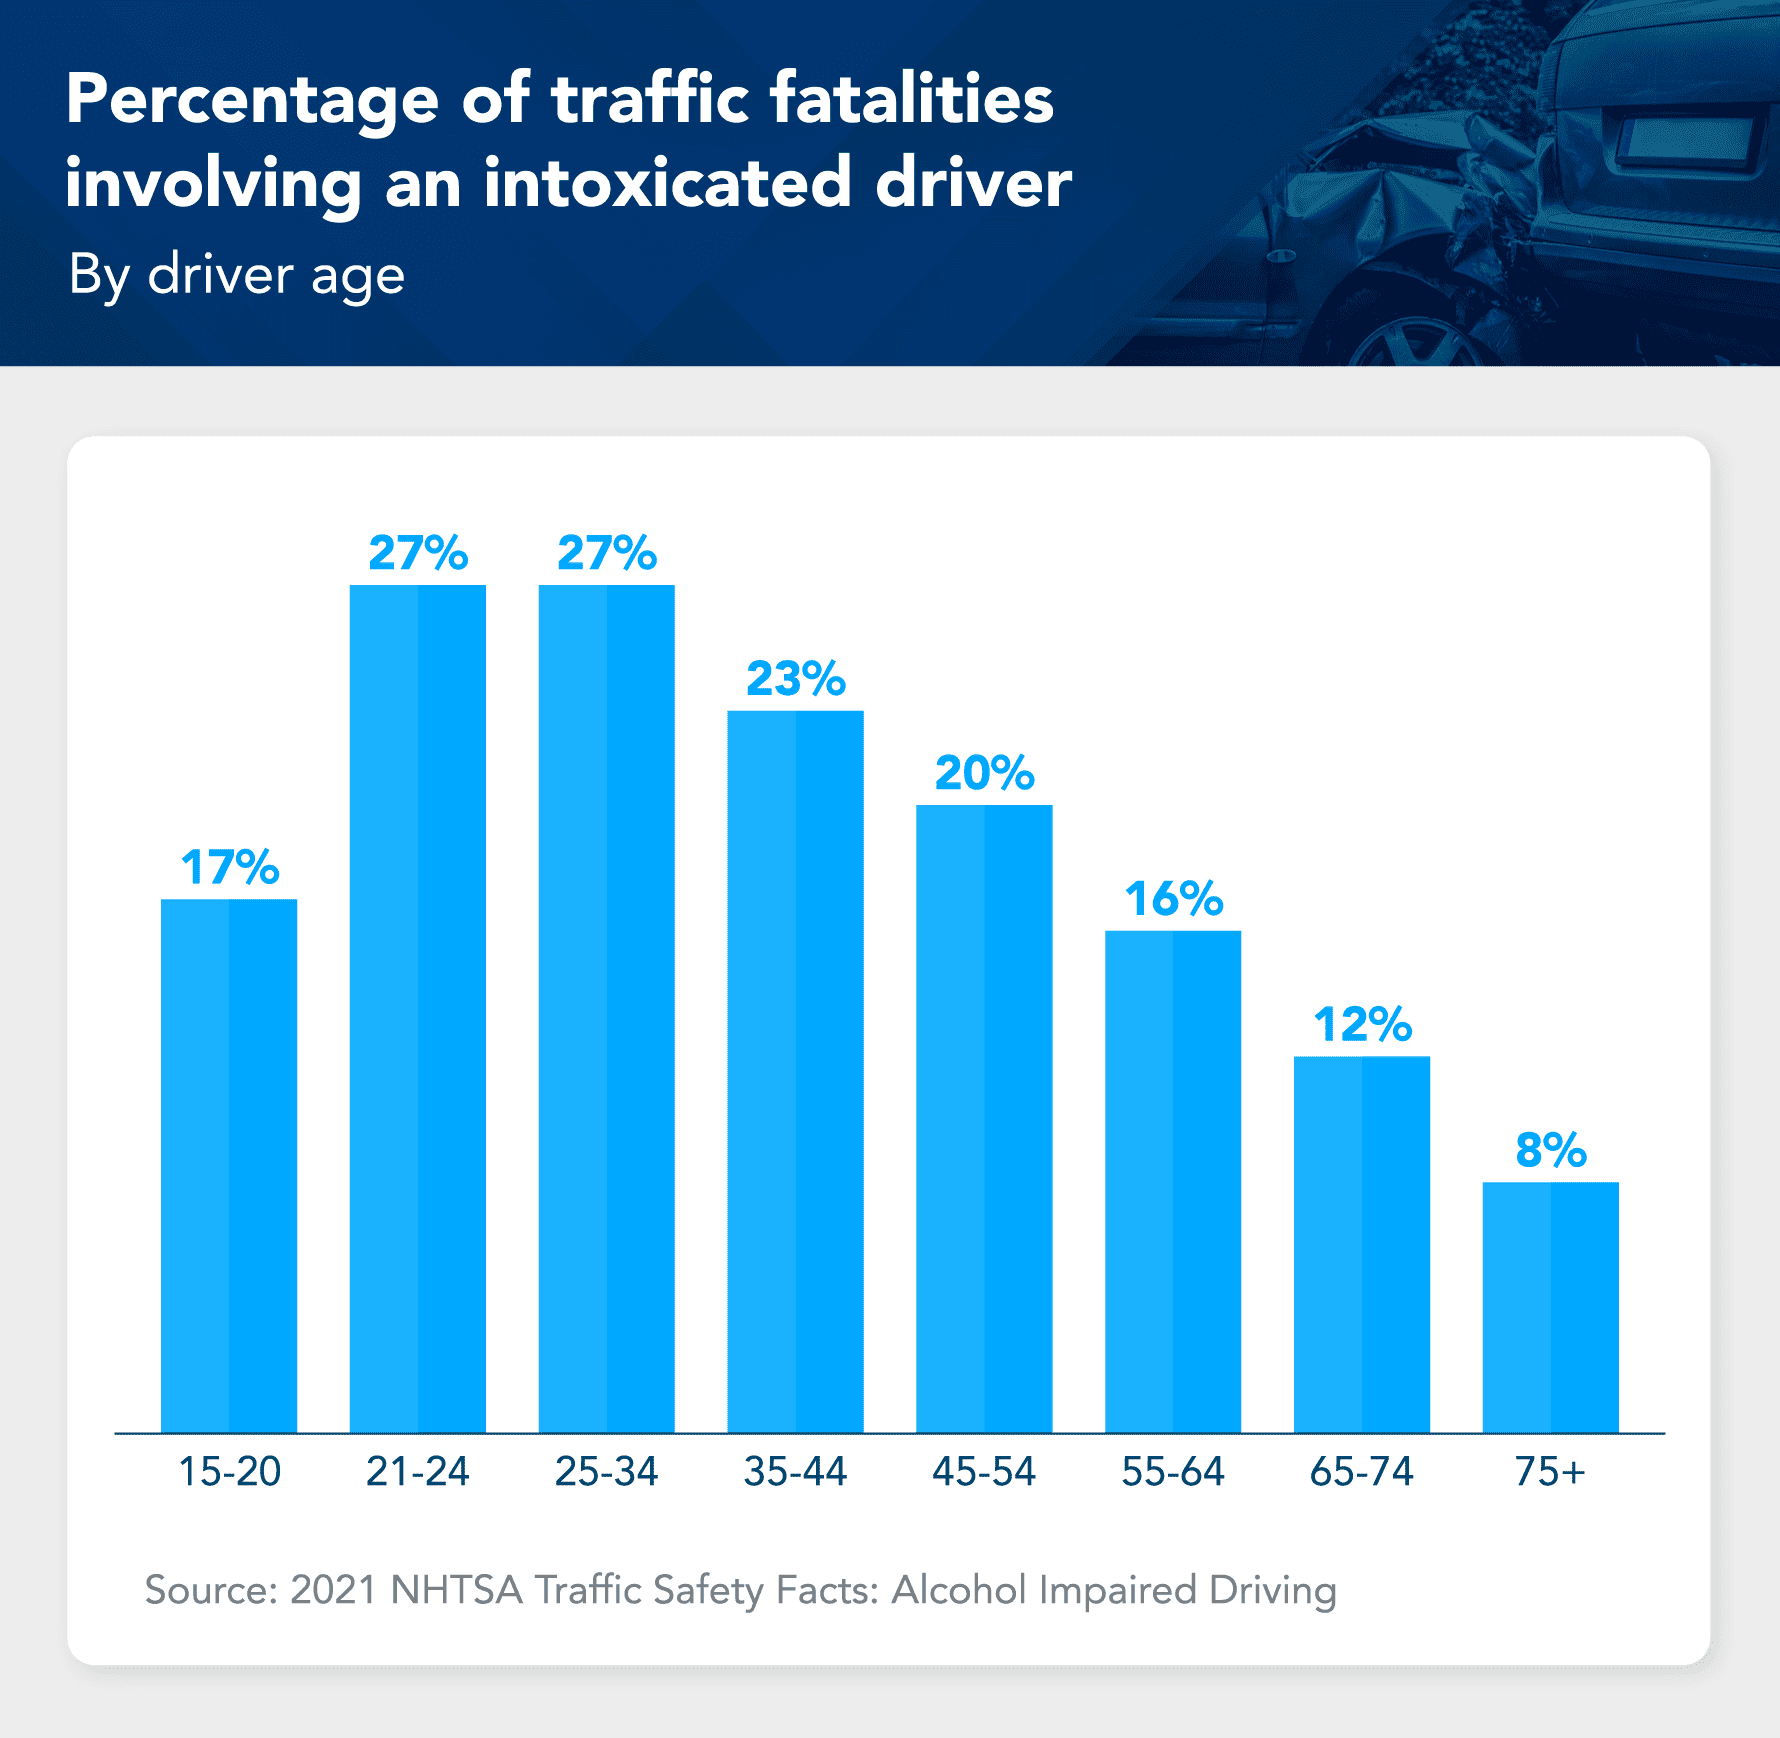 Percentage of traffic fatalities involving an intoxicated driver